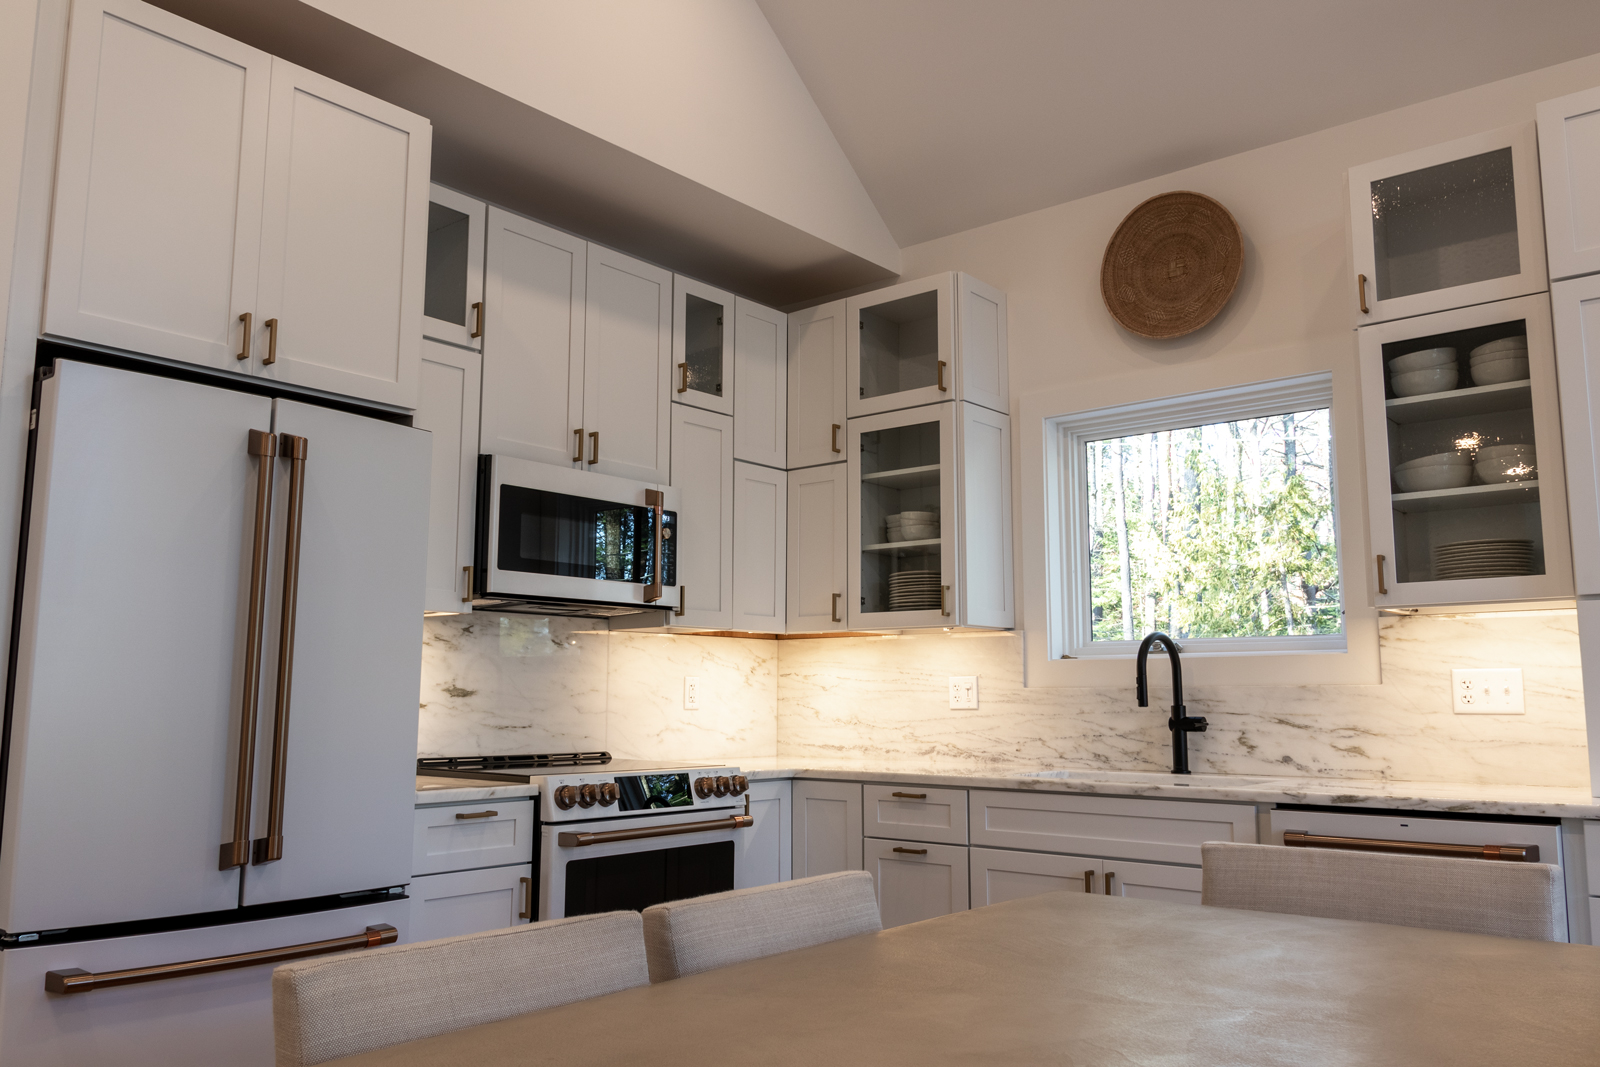 The Rock View Cabin kitchen is adorned with an elegant white interior that was inspired by historic lakeside camps. The white with bronze hardware Cafe Appliances gives a classy and refined look.   